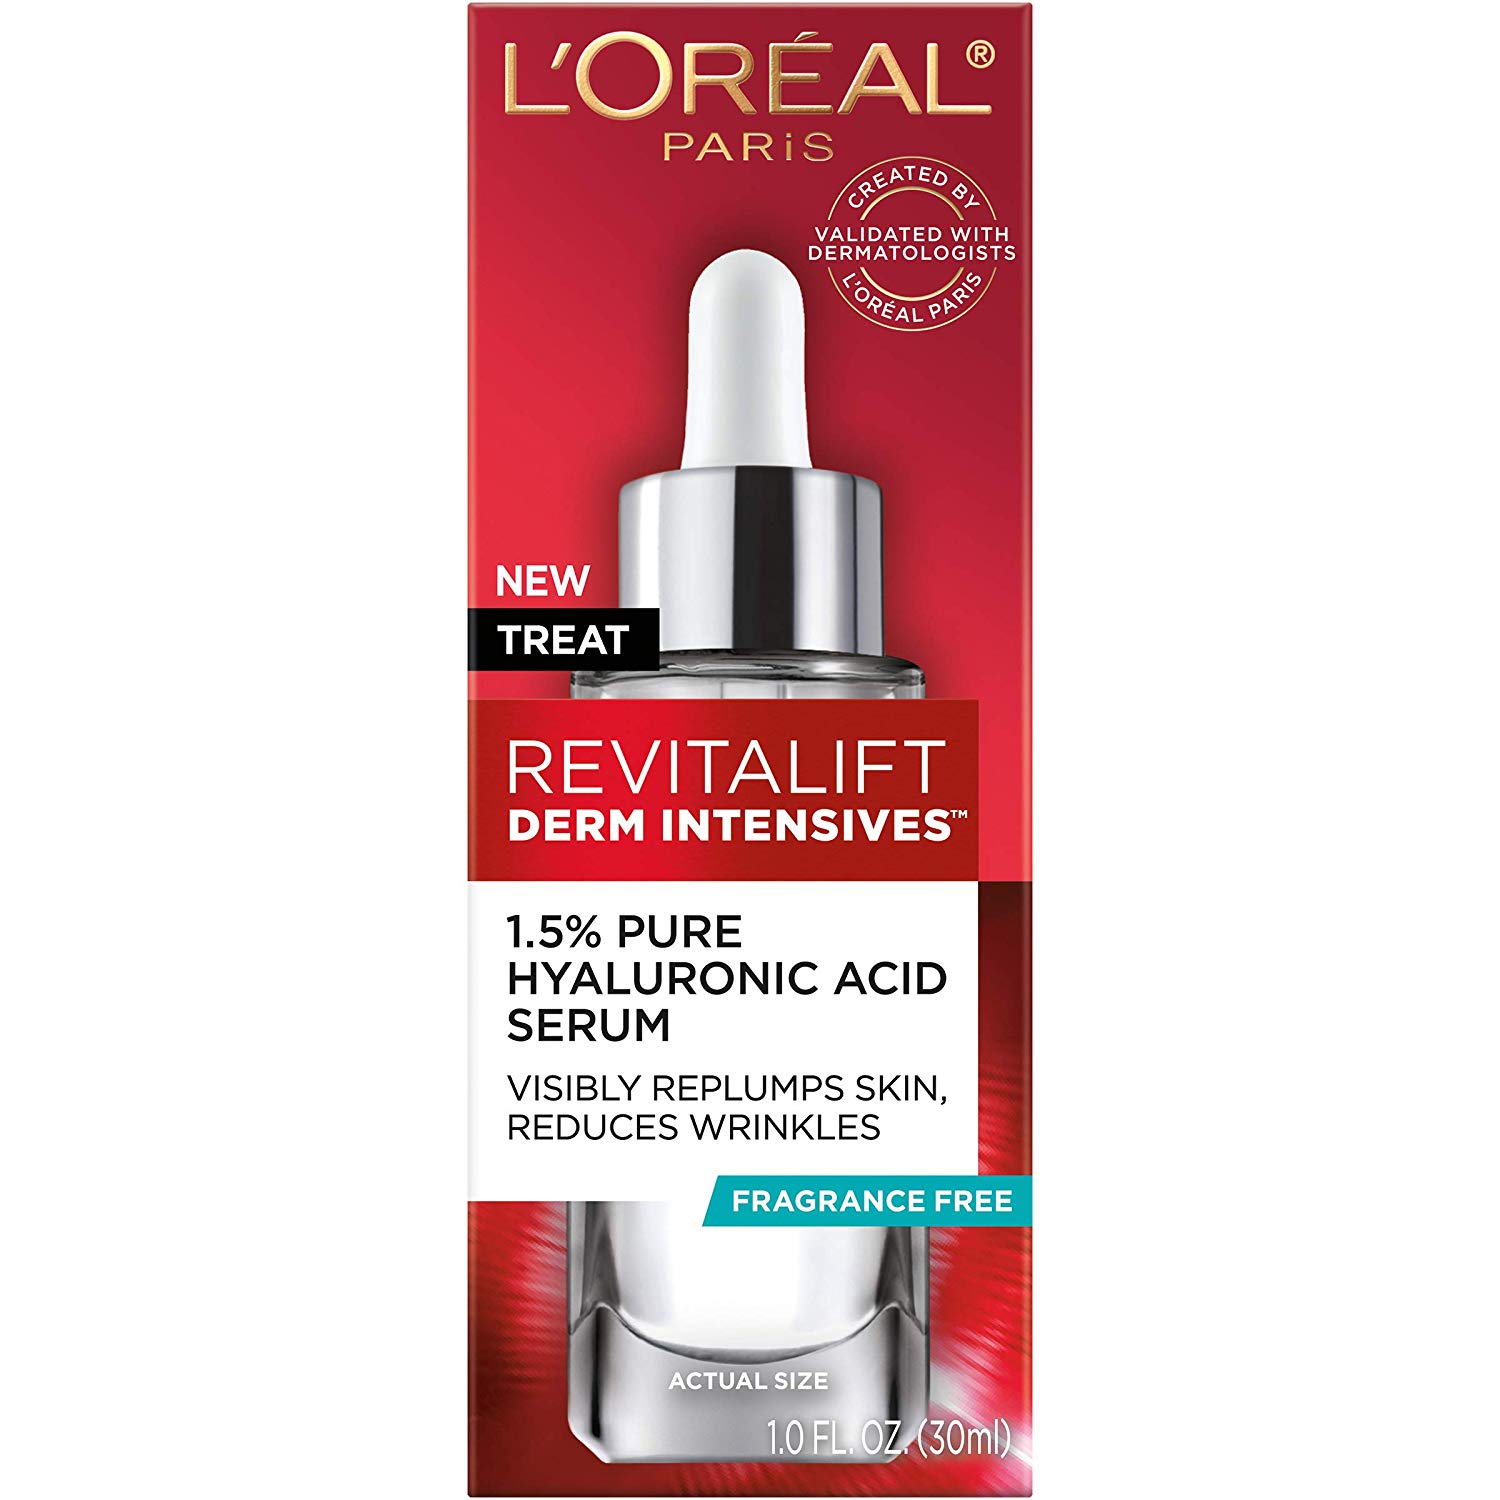 10 Best Loreal Hyaluronic Acid of 2021